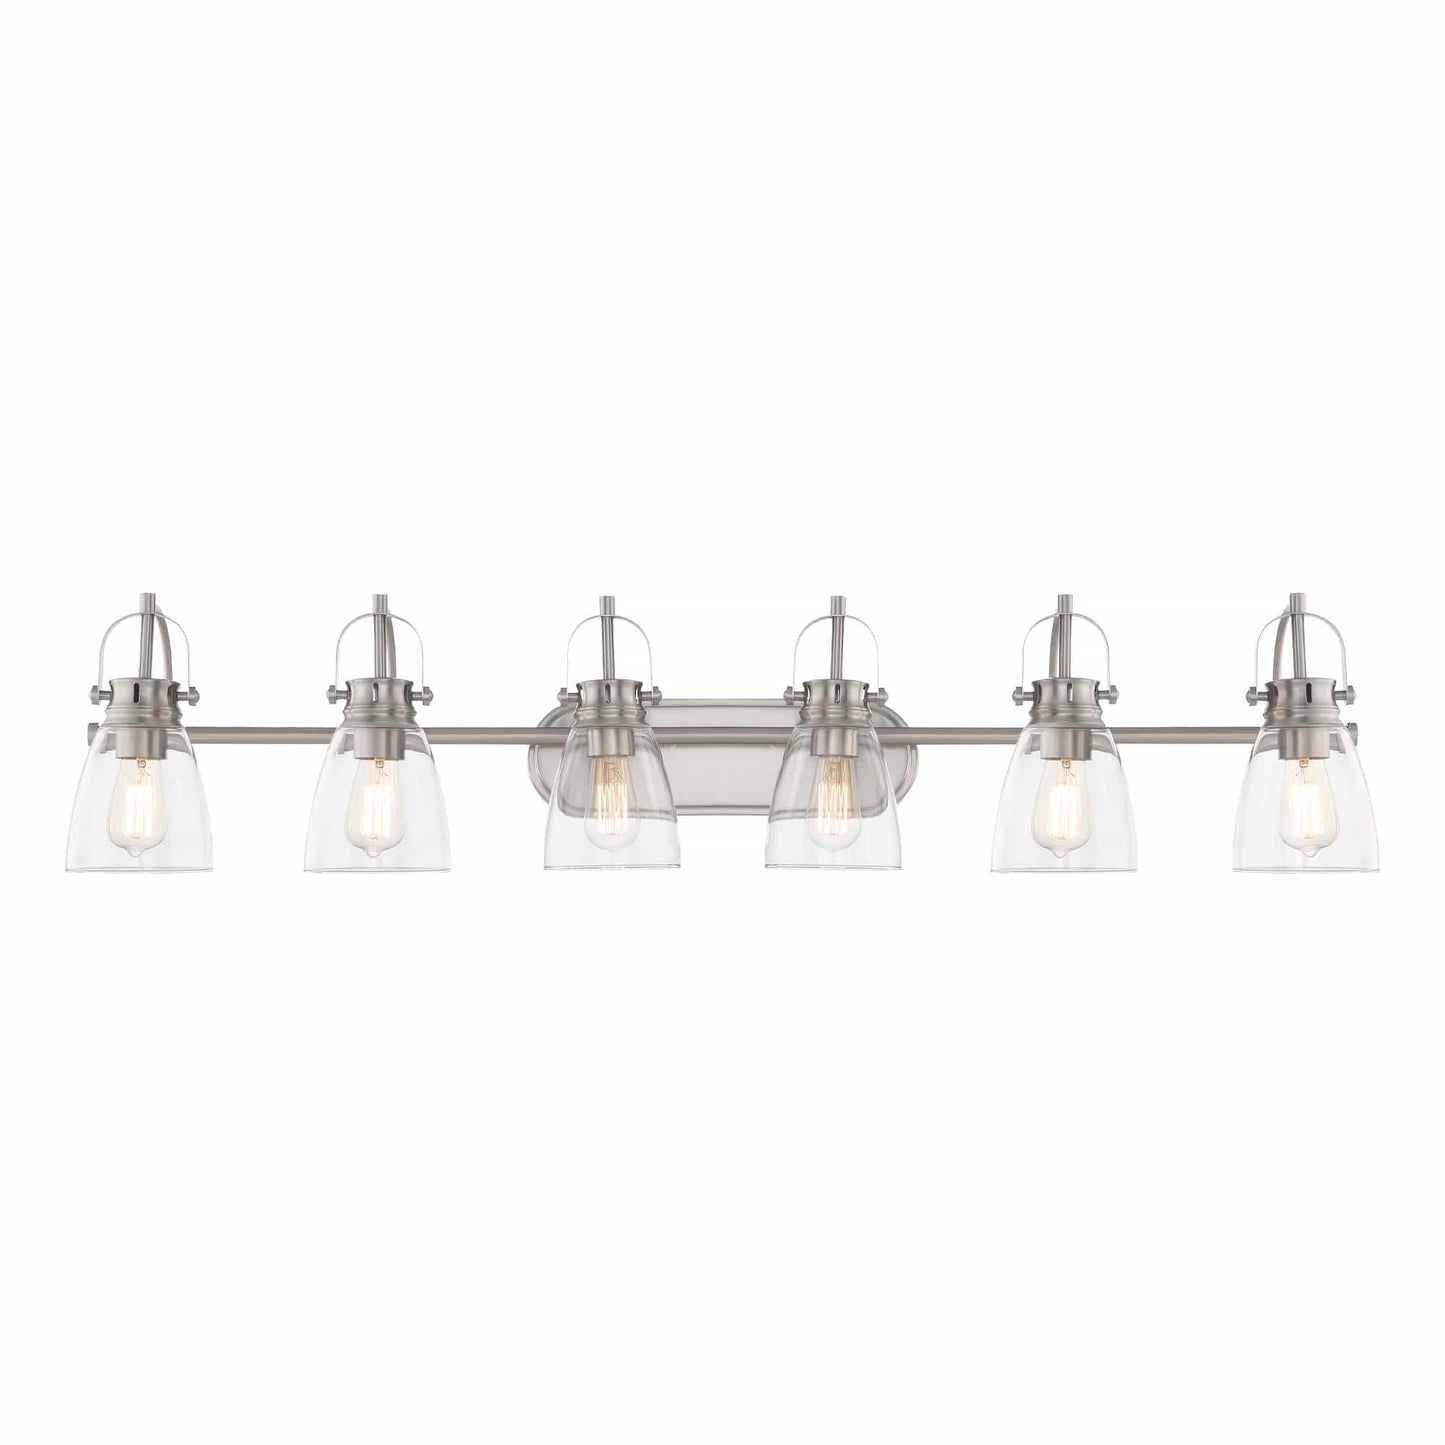 6806 | 6 - Light Dimmable Vanity Light by ACROMA™  UL - ACROMA